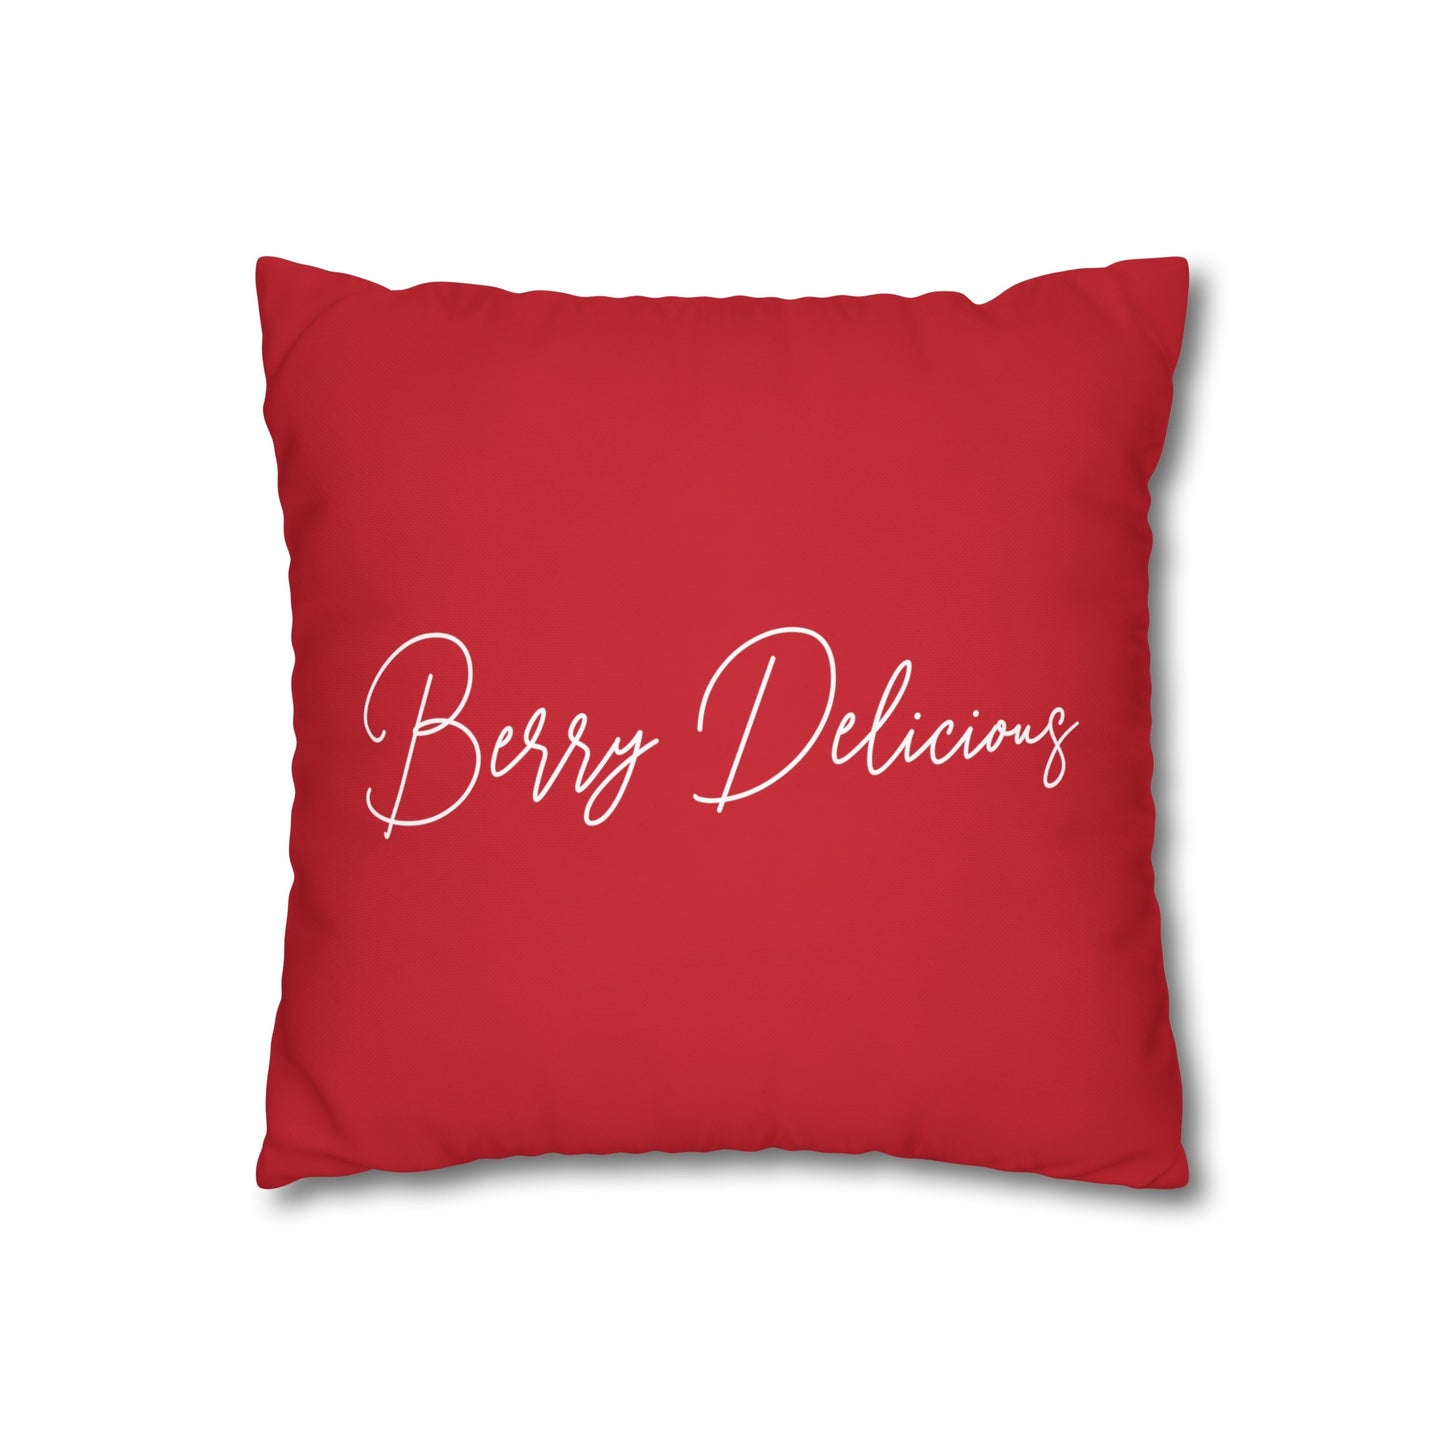 Berry Delicious Strawberry #2 Cushion Cover